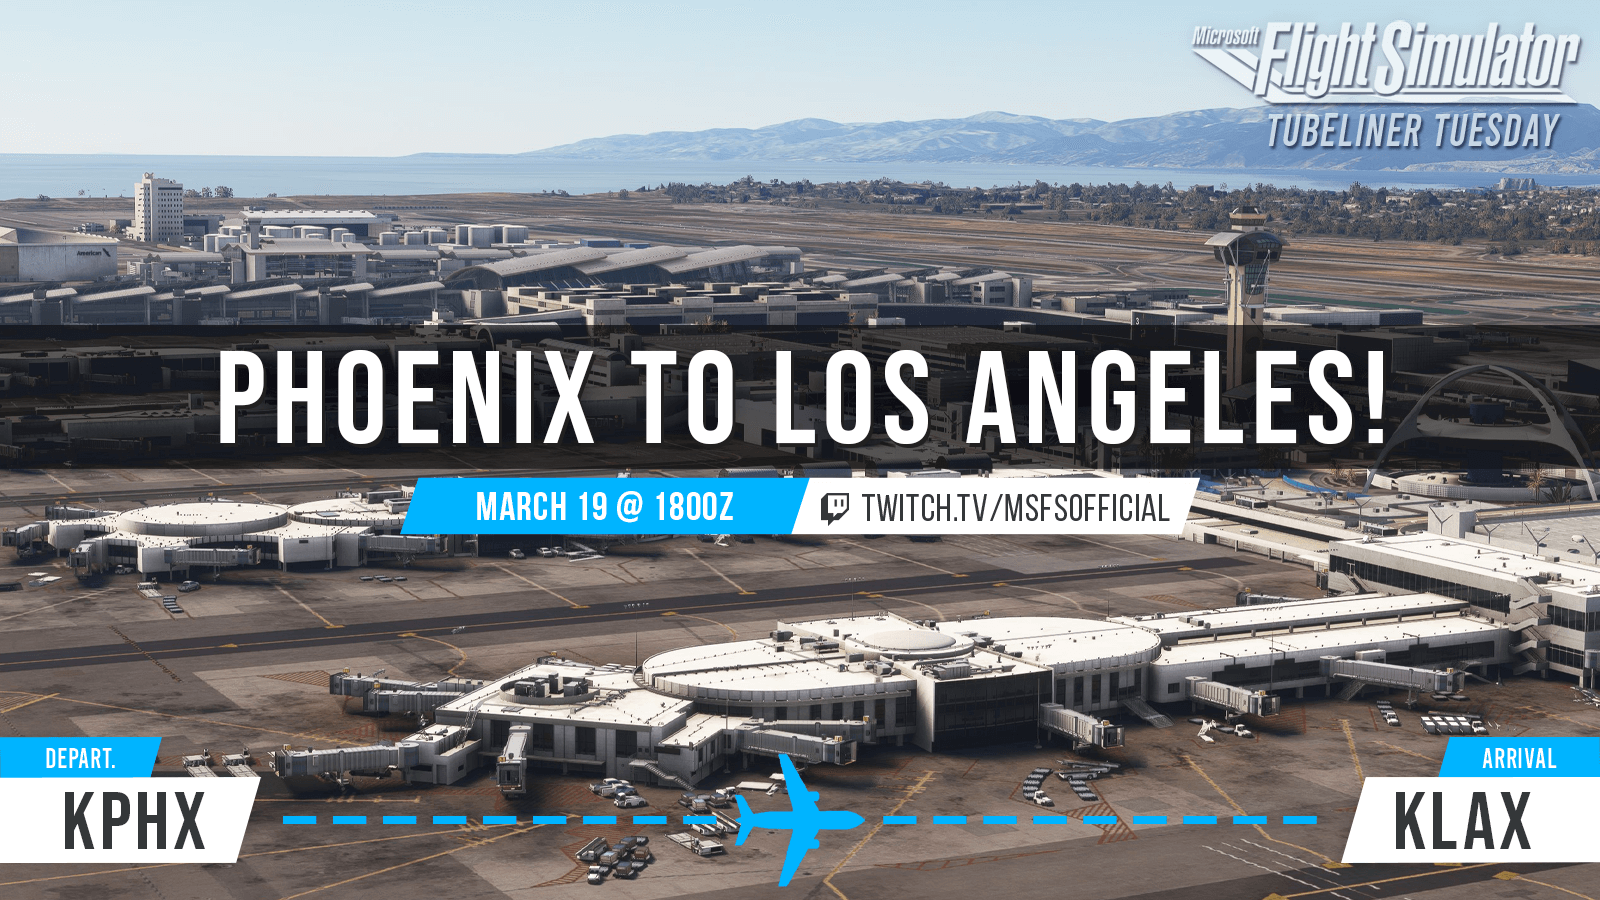 Tubeliner Tuesday: Phoenix to Los Angeles. March 19 at 1800 UTC. twitch.tv/msfsofficial